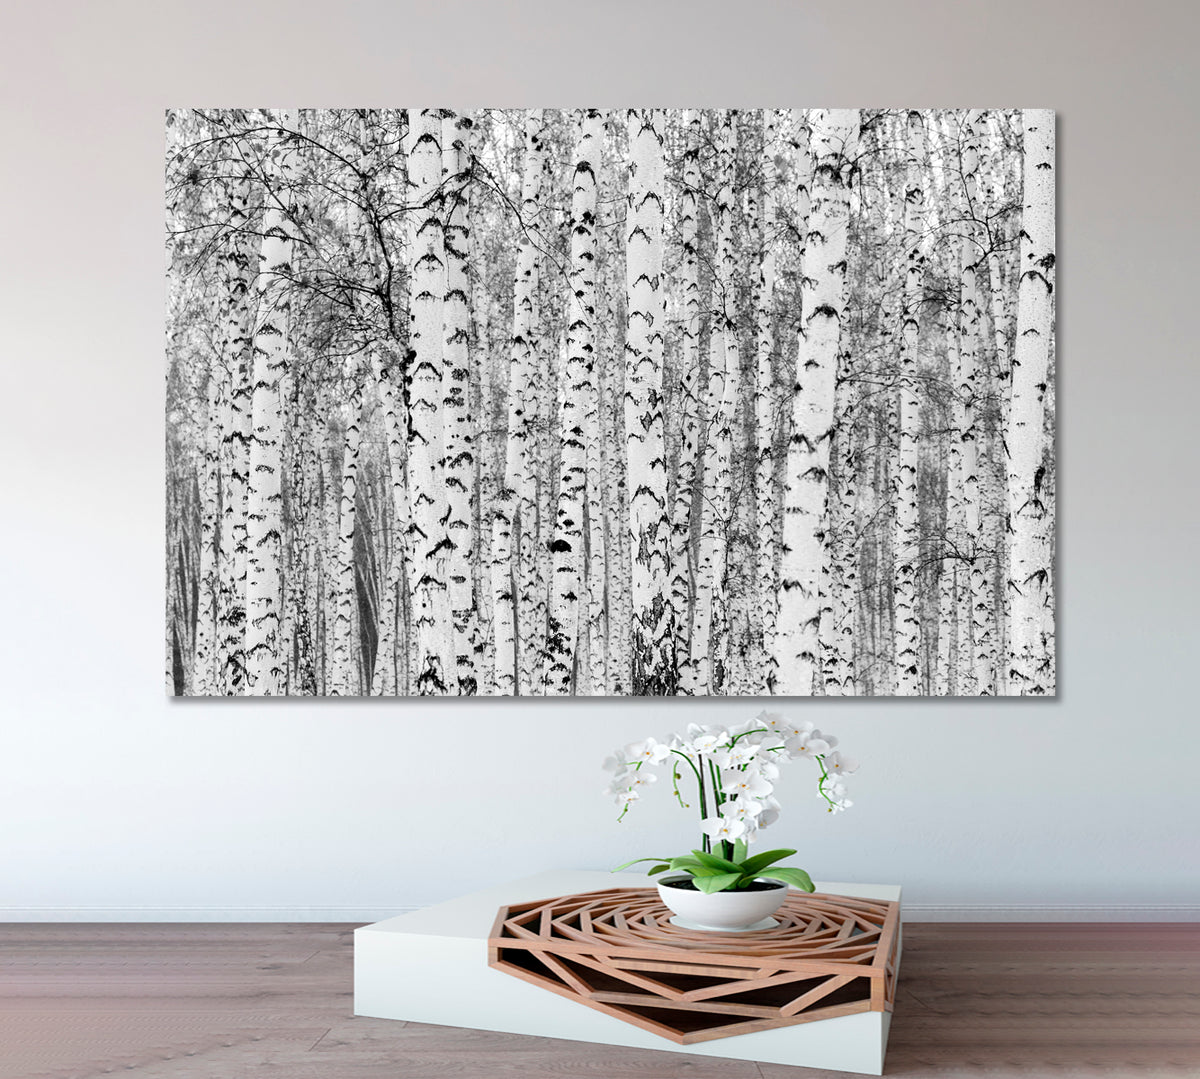 Birch Forest Winter Landscape Black and White Photo Print Nature Wall Canvas Print Artesty 1 panel 24" x 16" 